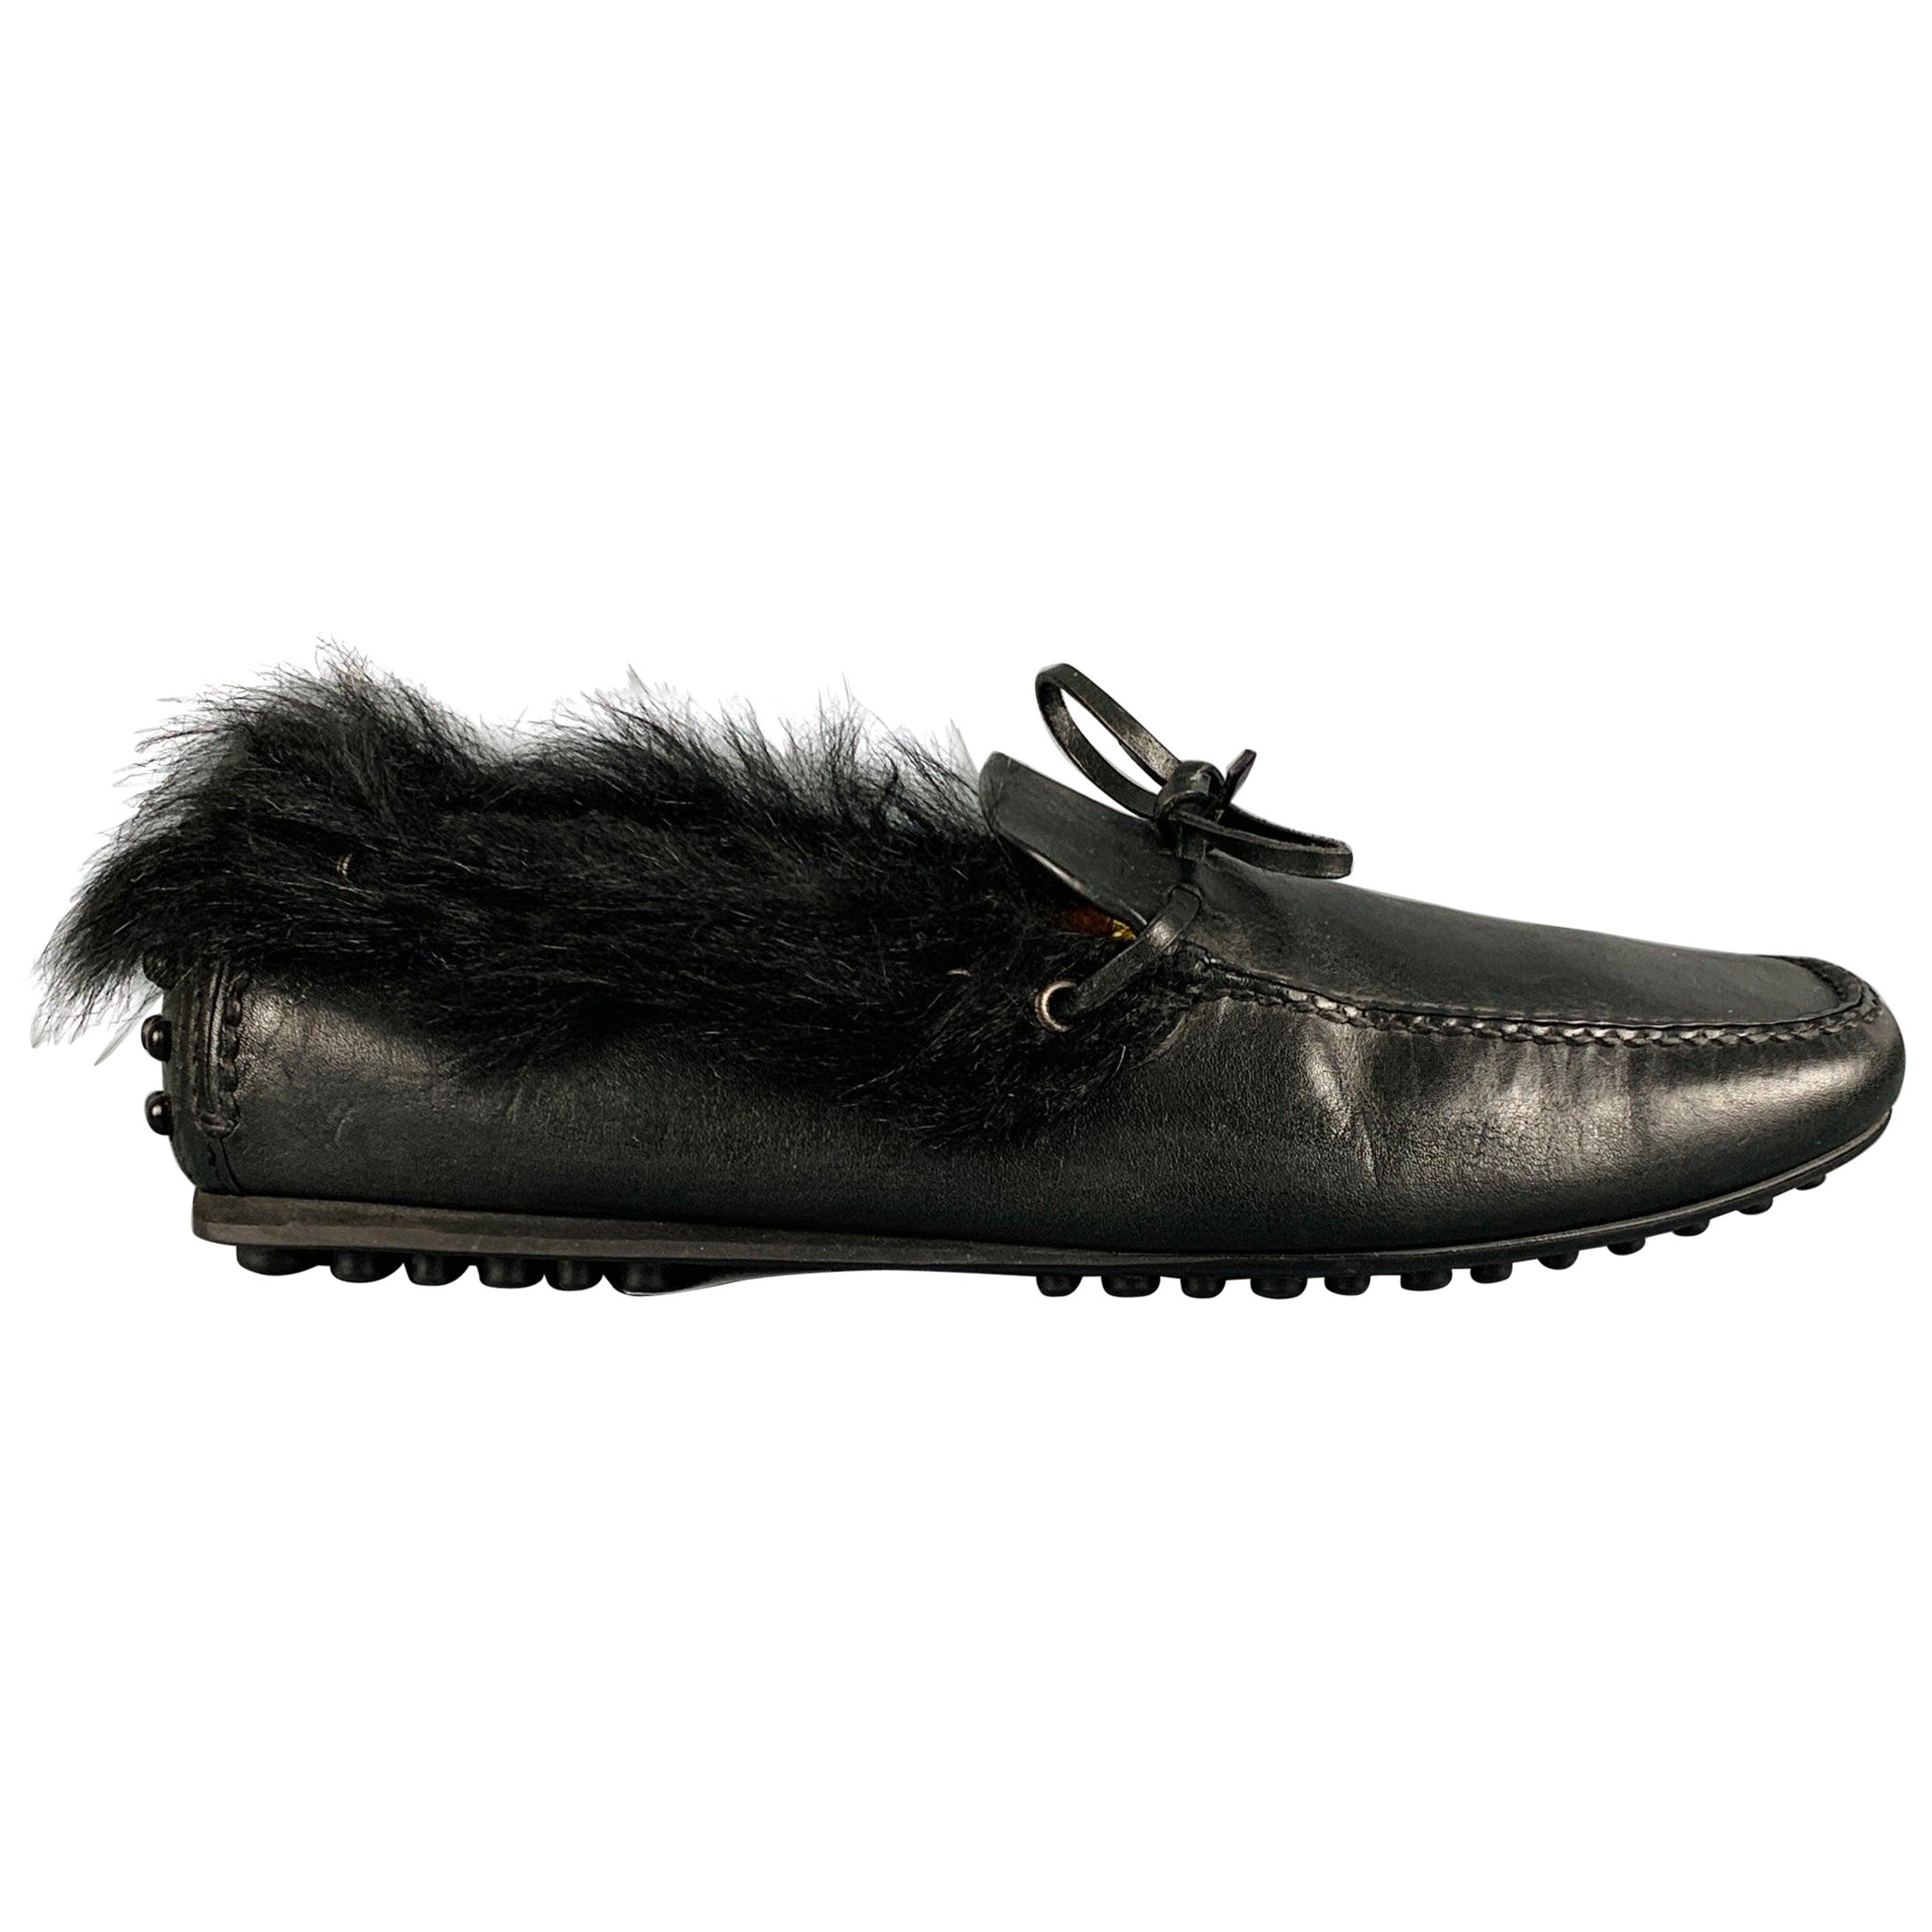 CAR SHOE Size 8 Black Leather Fur Trim Drivers Loafers For Sale